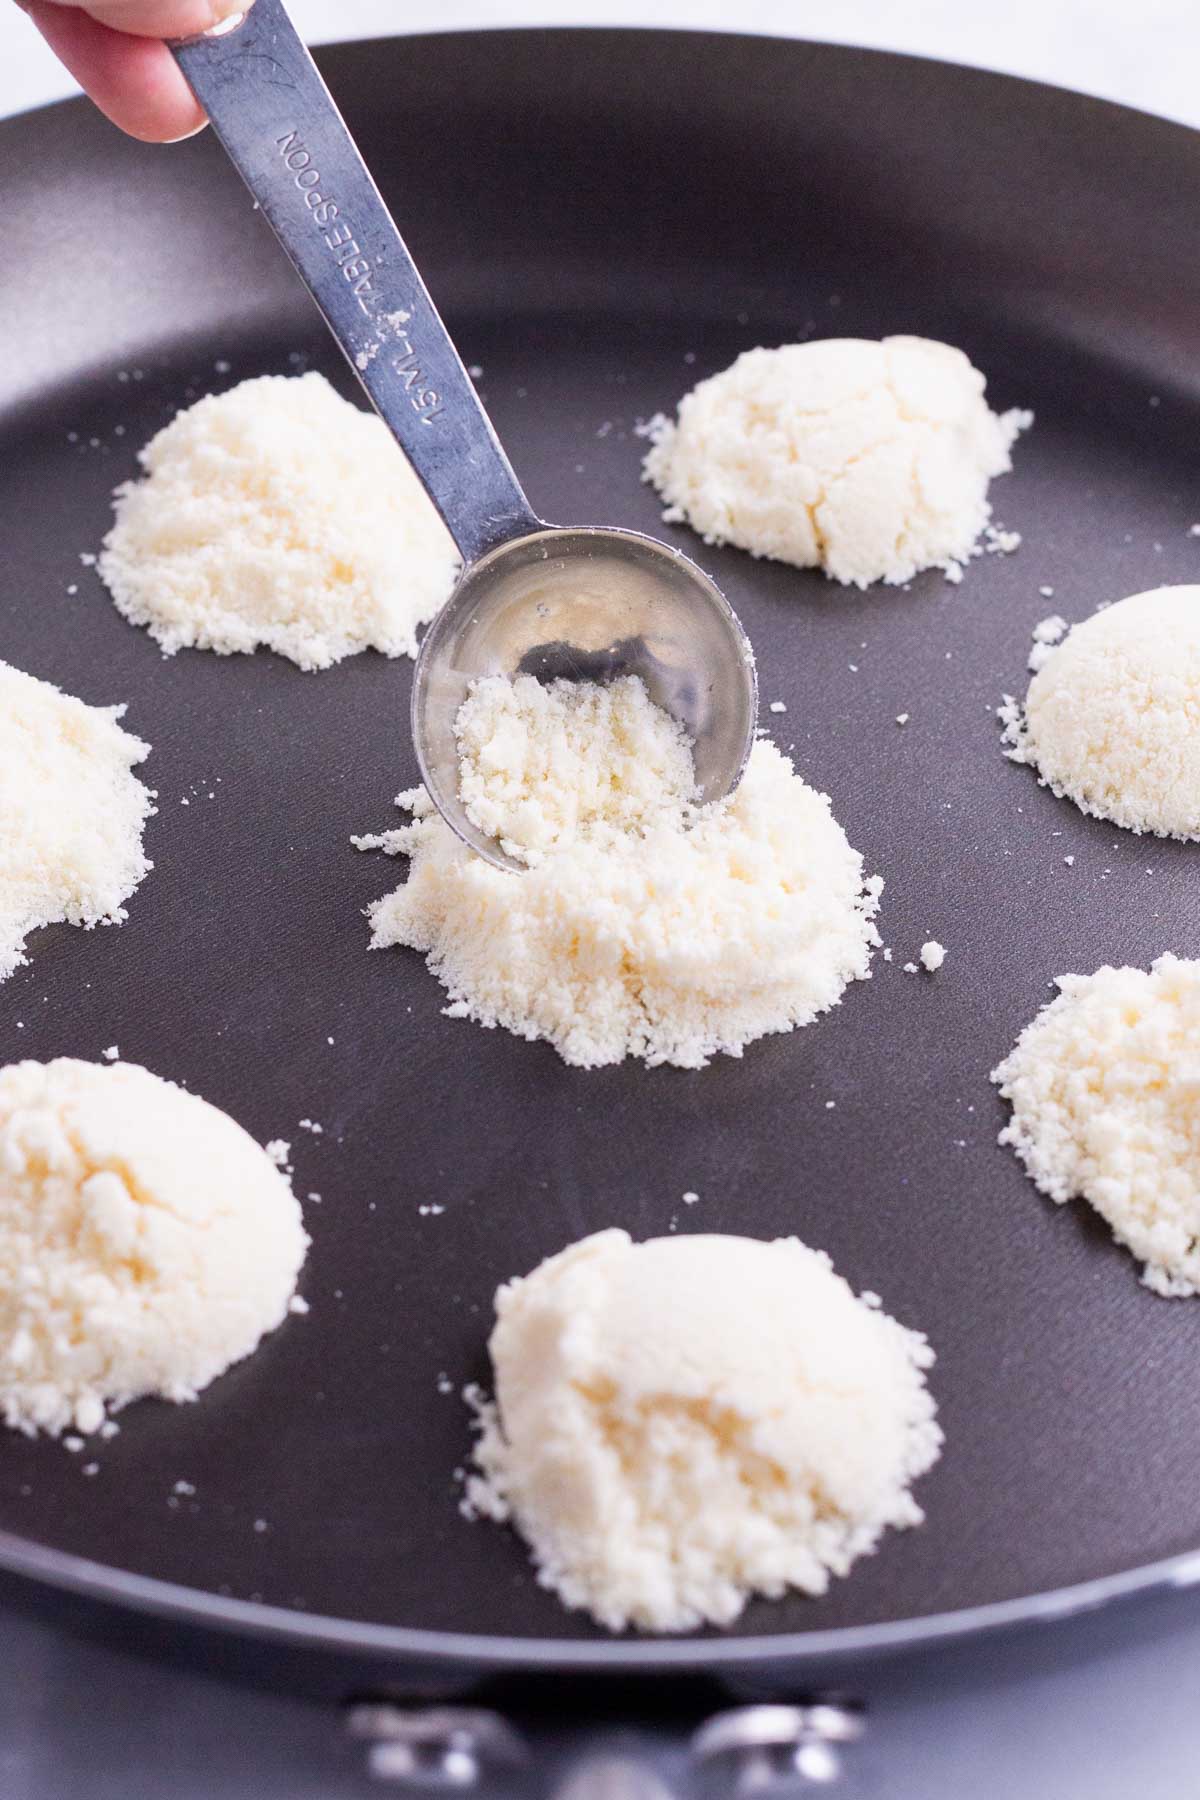 A spoon scoops Parmesan cheese onto a skillet.